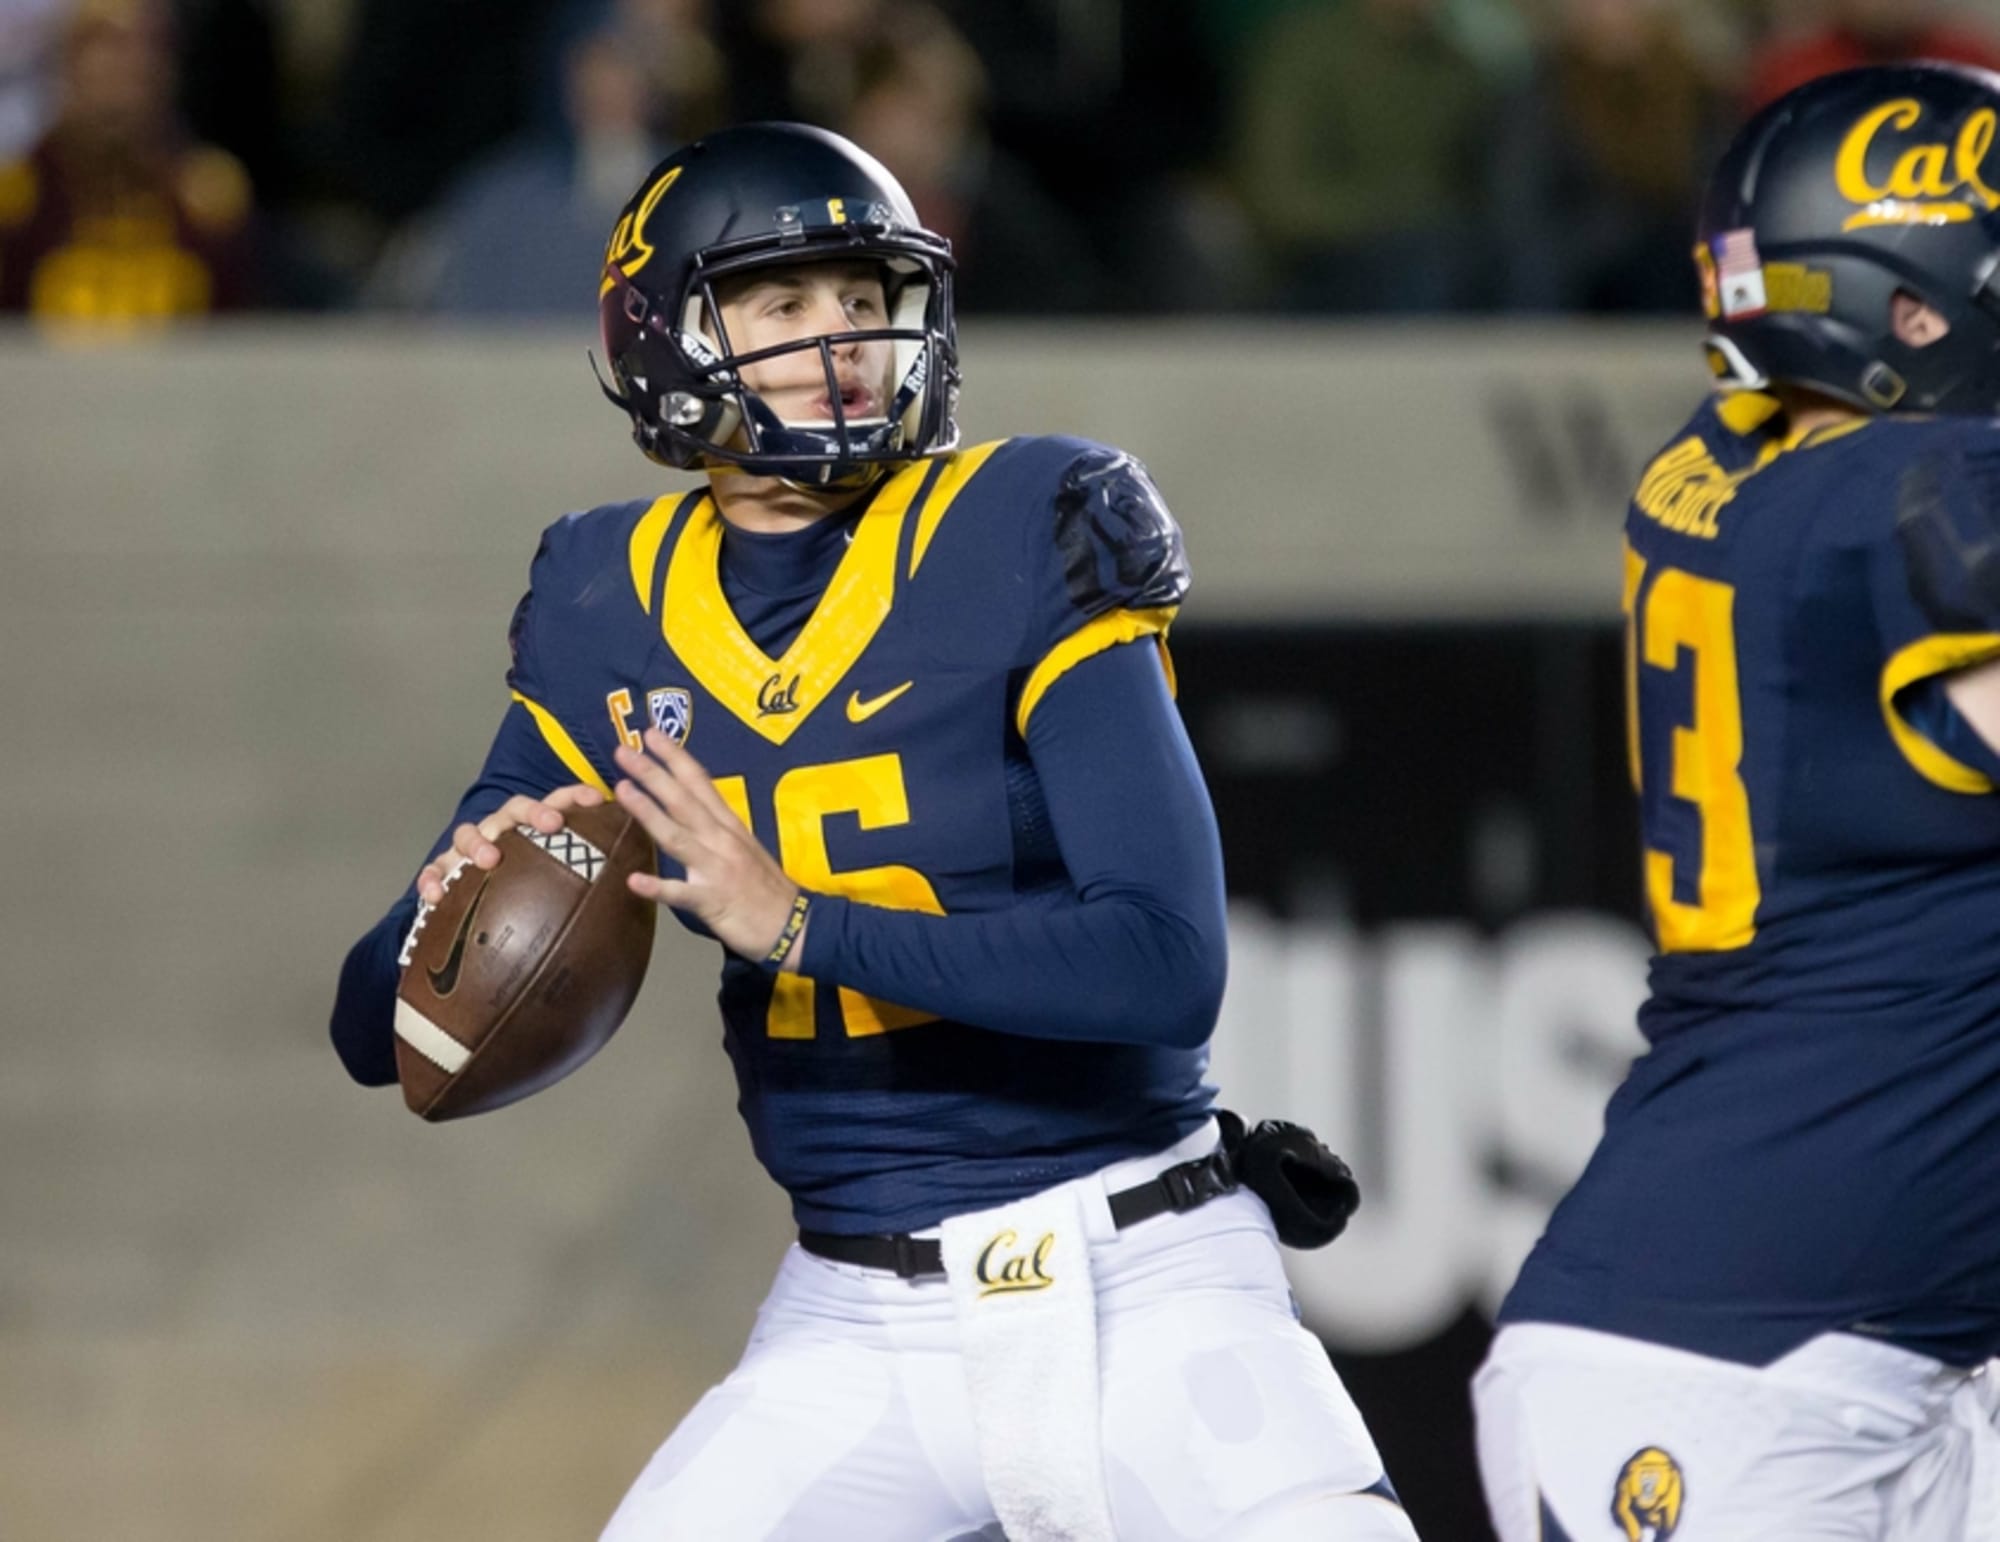 Cleveland Browns Rumors: Jared Goff is Preferred QB Option